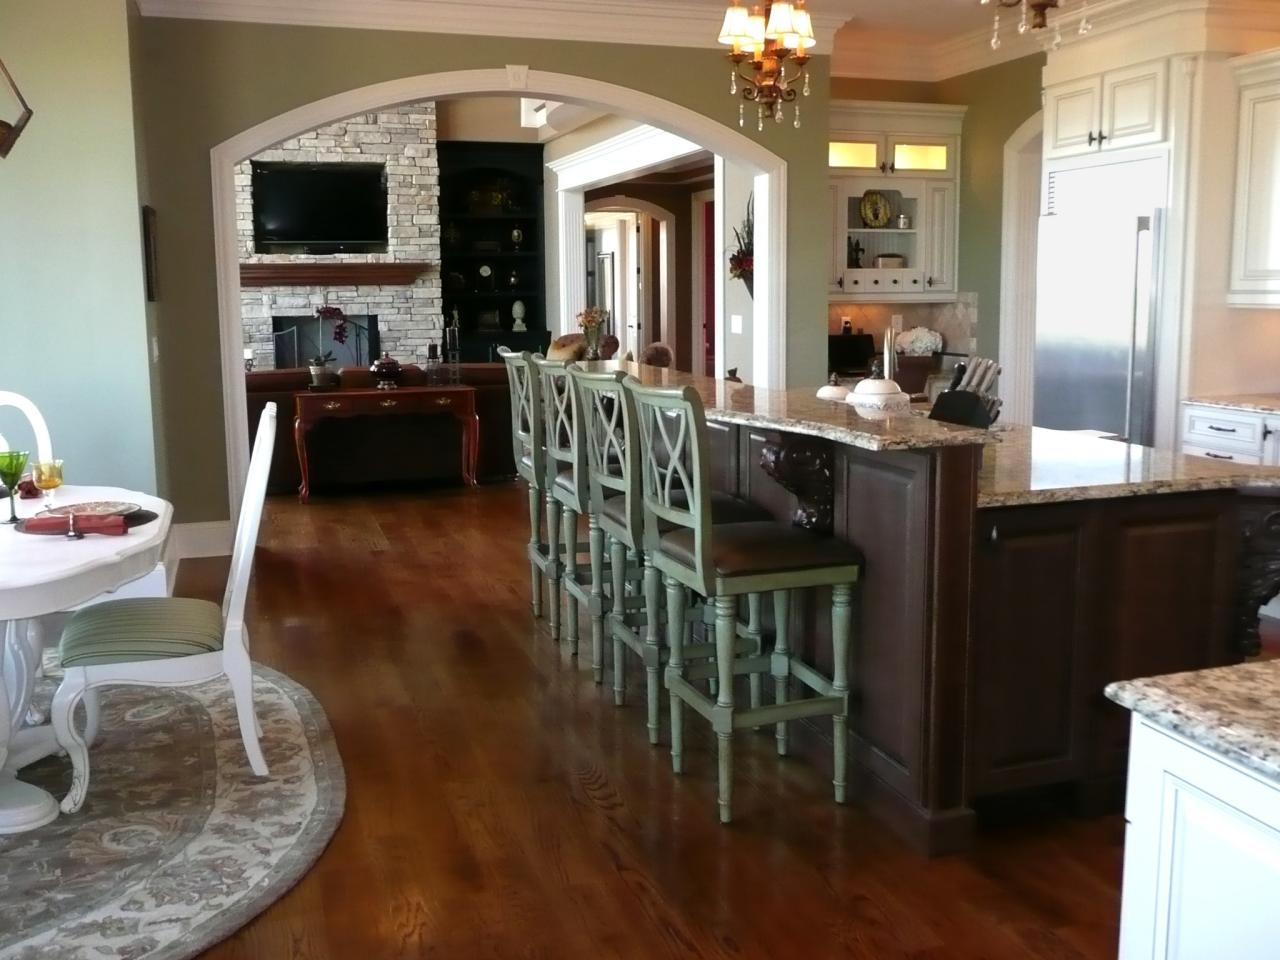 Kitchen Islands With Stools Pictures, Kitchen Island With 4 Bar Stools